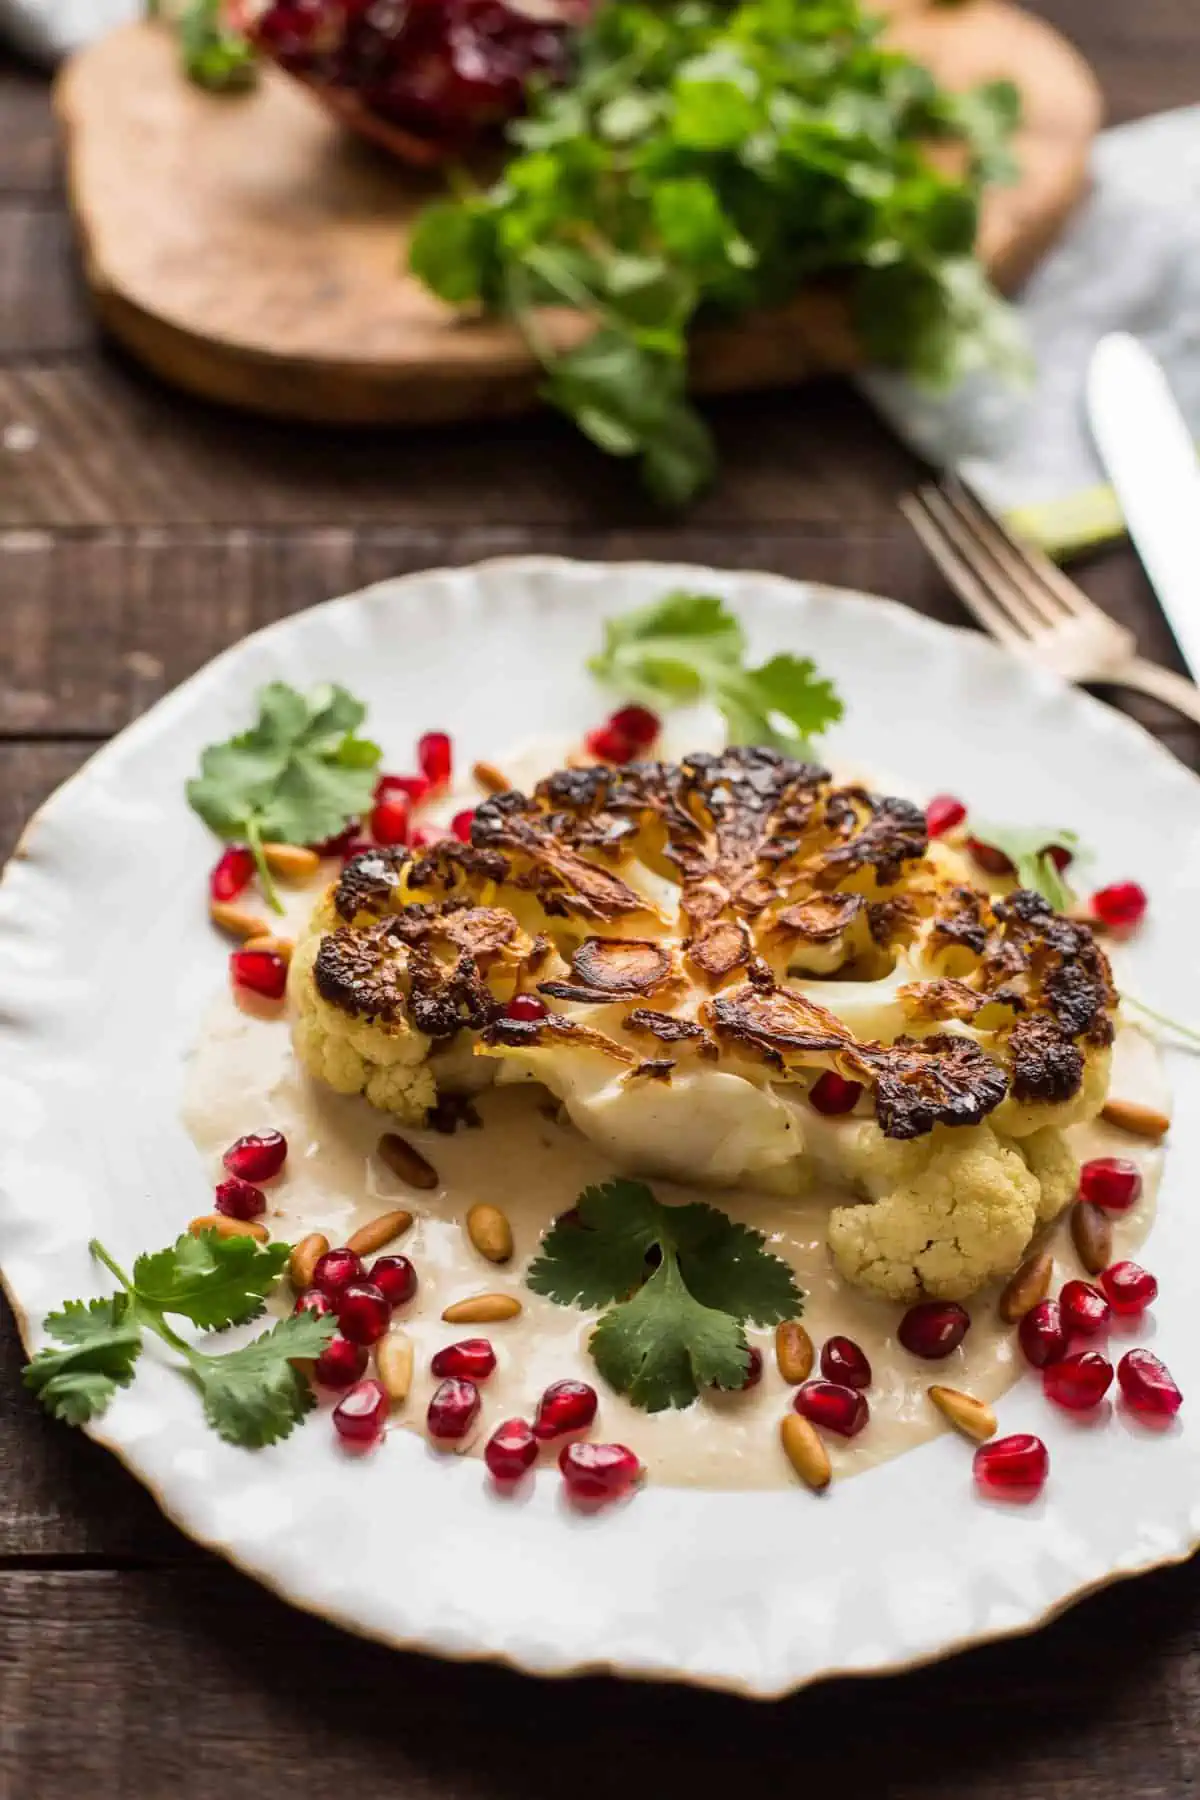 A cauliflower steak surrounded by tahini, cilantro, and pomegranate arils on a white dinner plate.